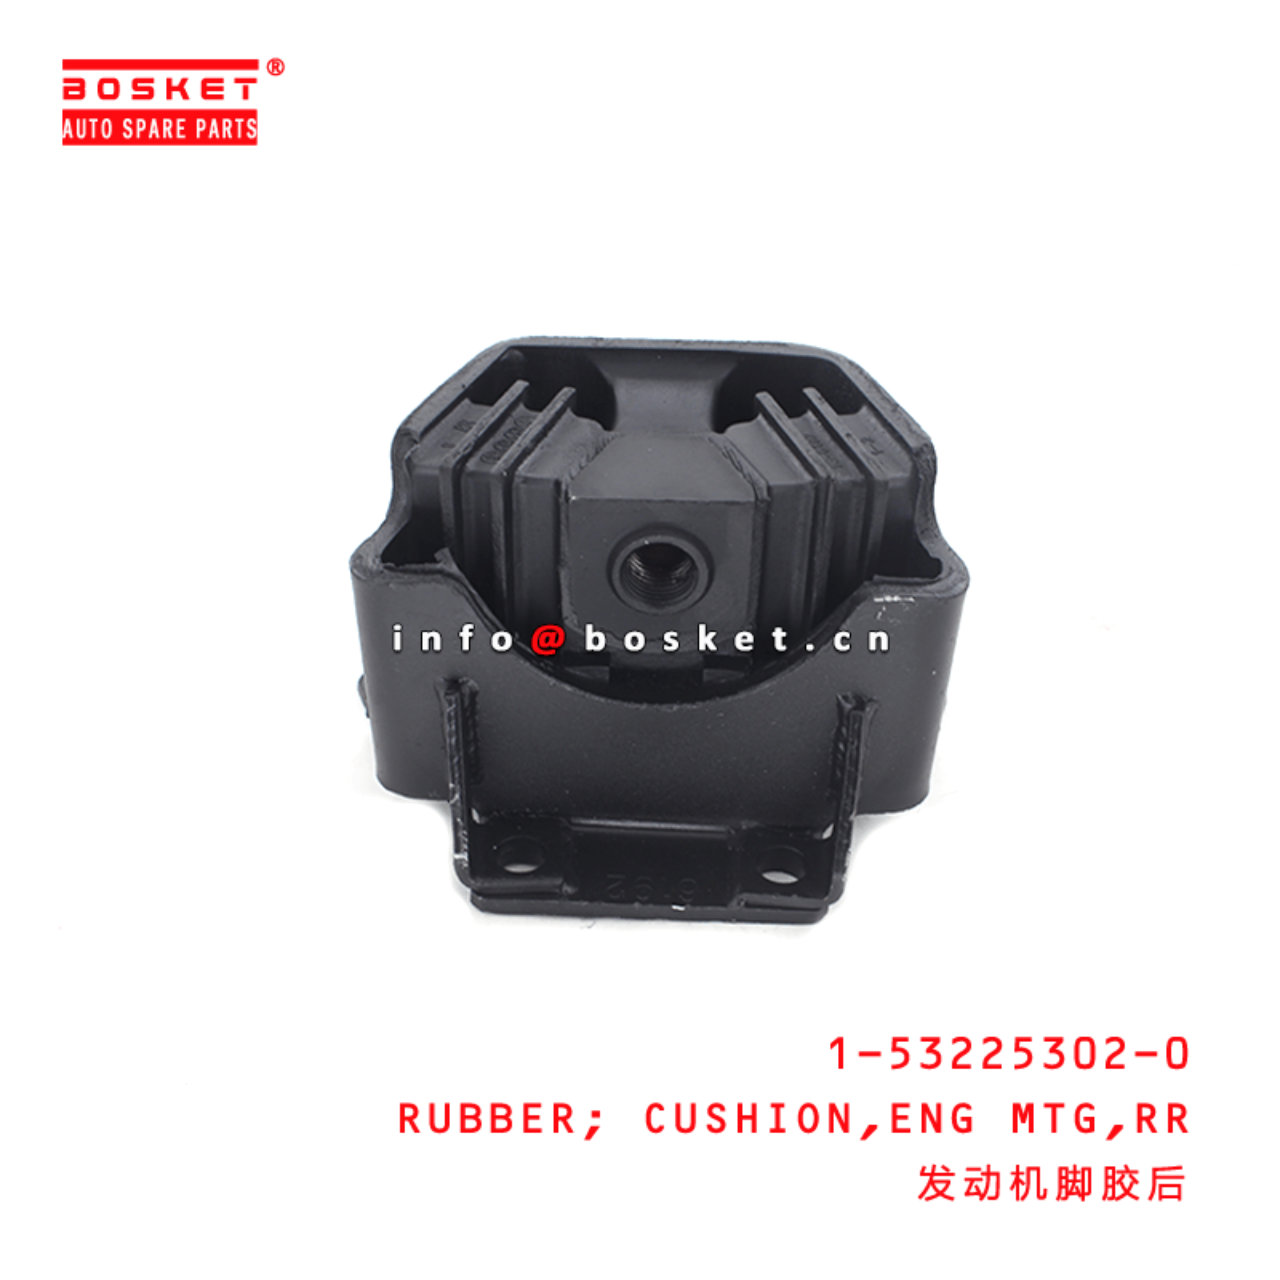 1-53225302-0 Rear Engine Mounting Cushion Rubber 1532253020 Suitable for ISUZU FVZ34 6HK1